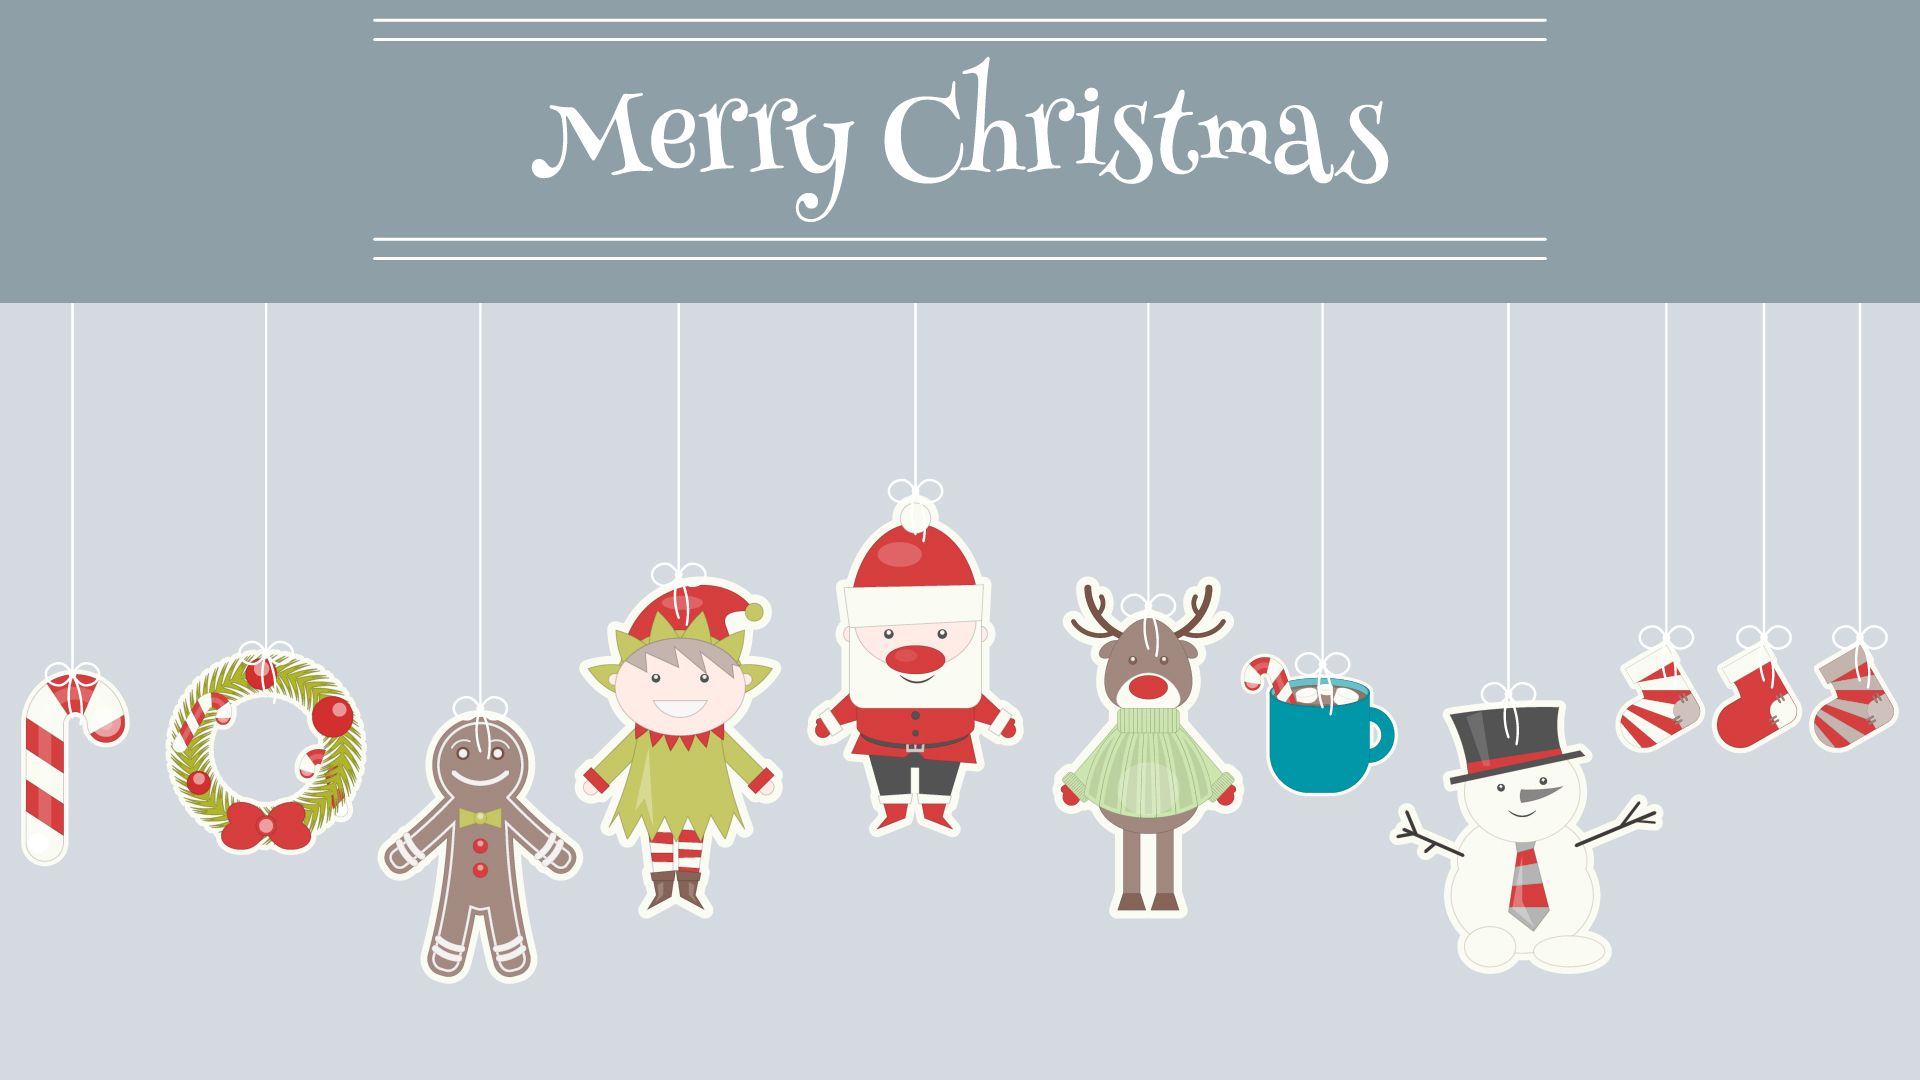 Merry Christmas Wallpaper For Laptop Wallpaper & Background Download